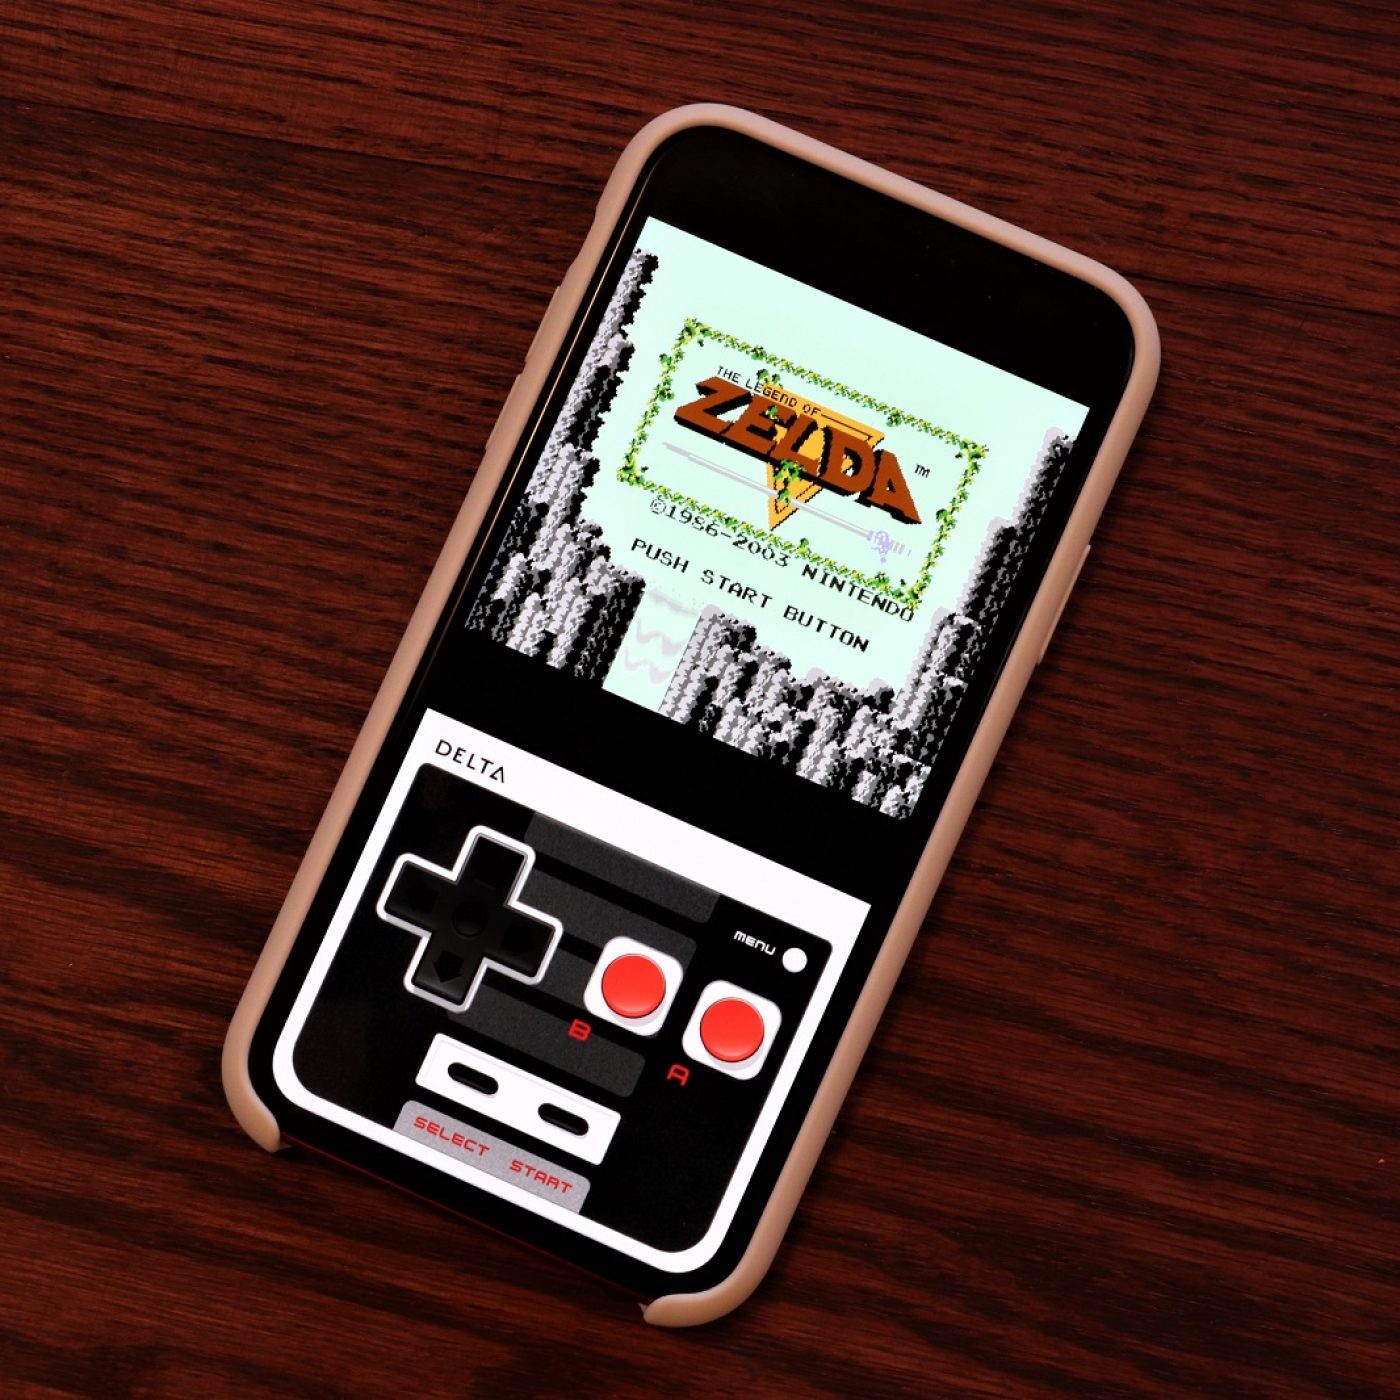 5 Best GBA Emulators For iOS in 2022 